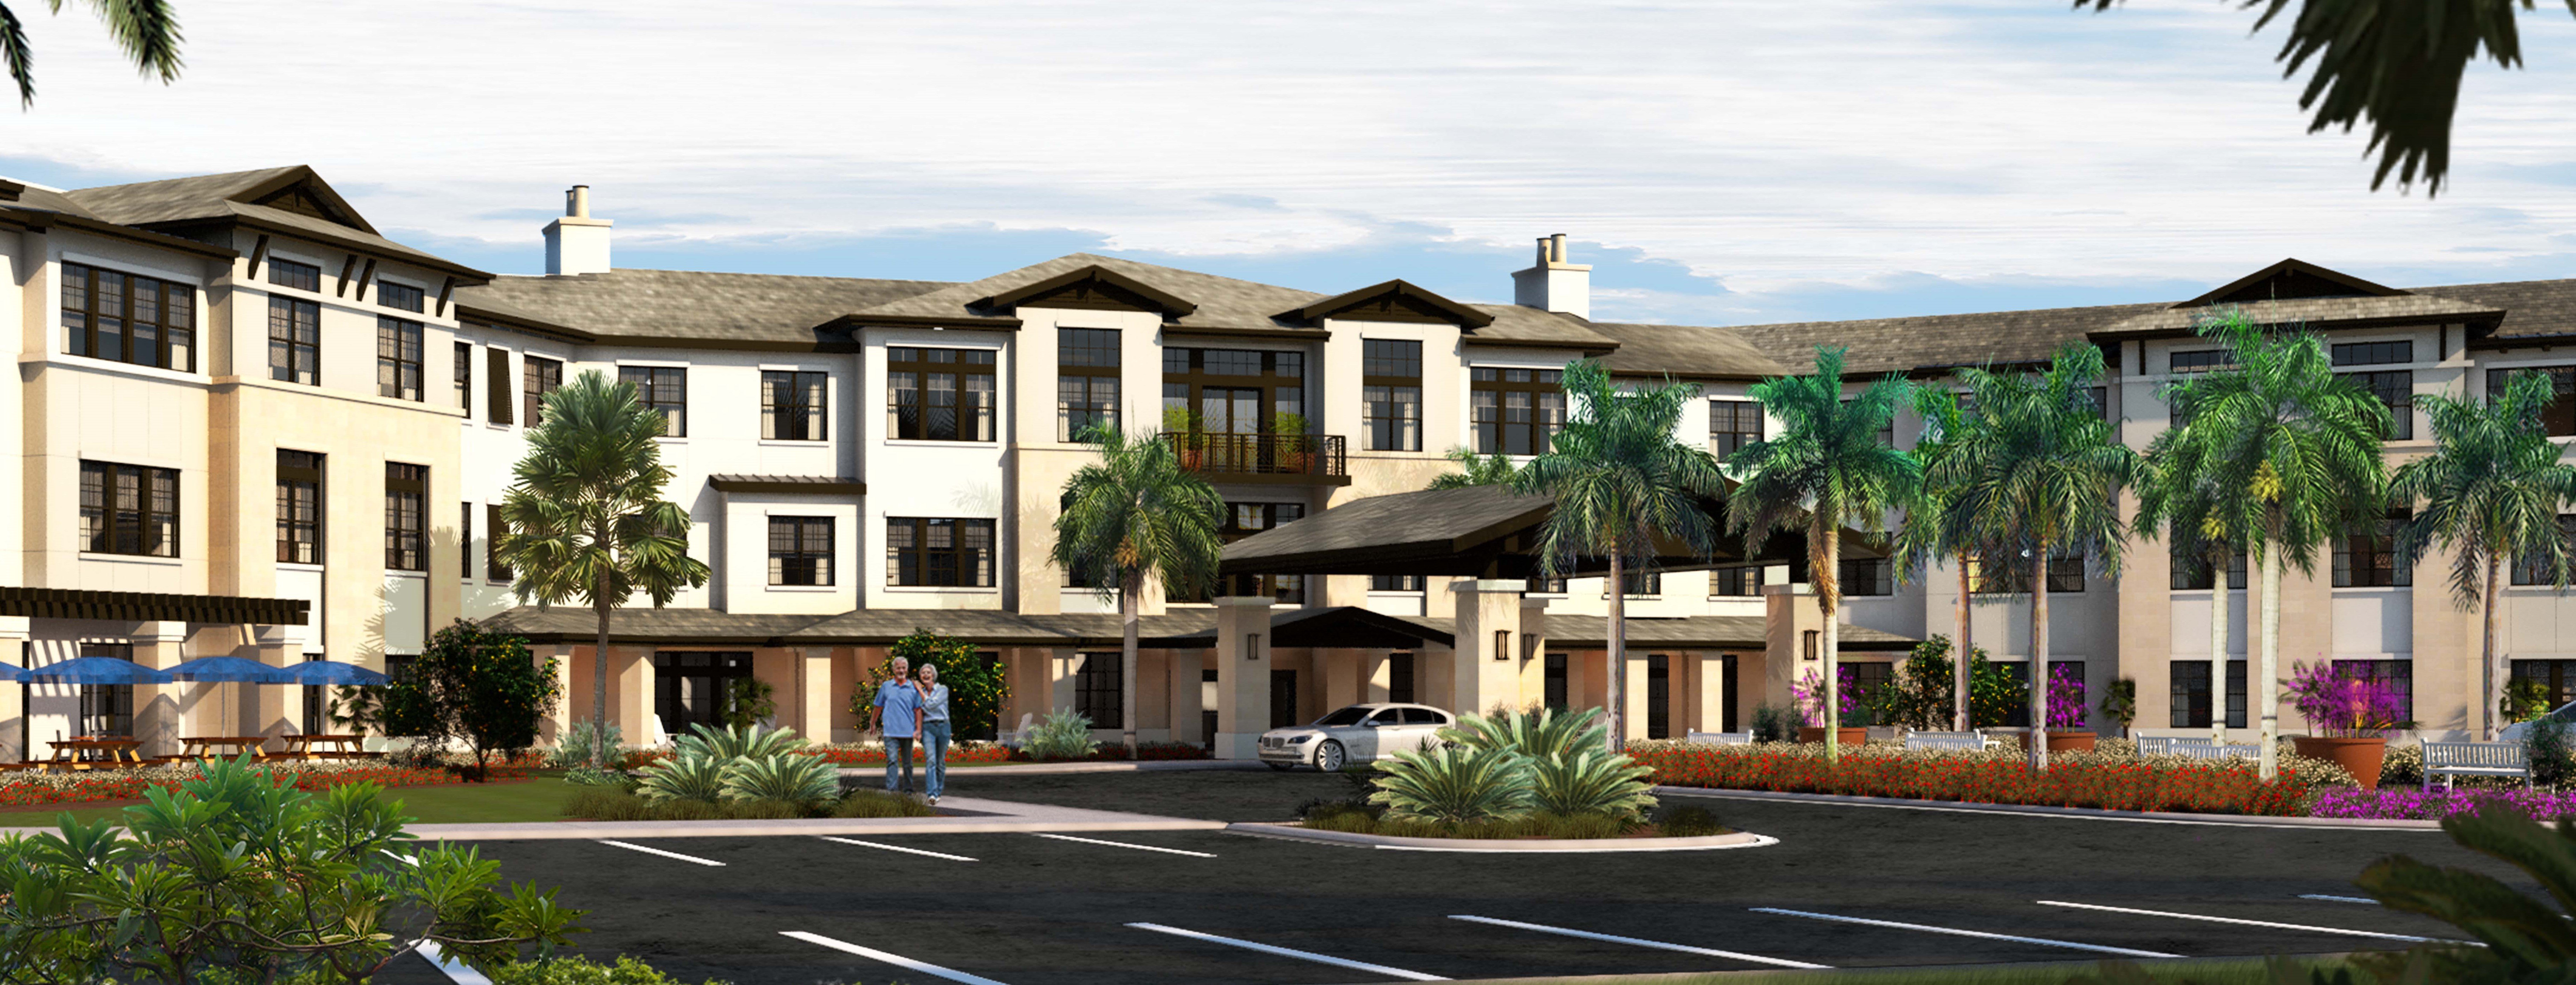 Starling Independent Living at Nocatee